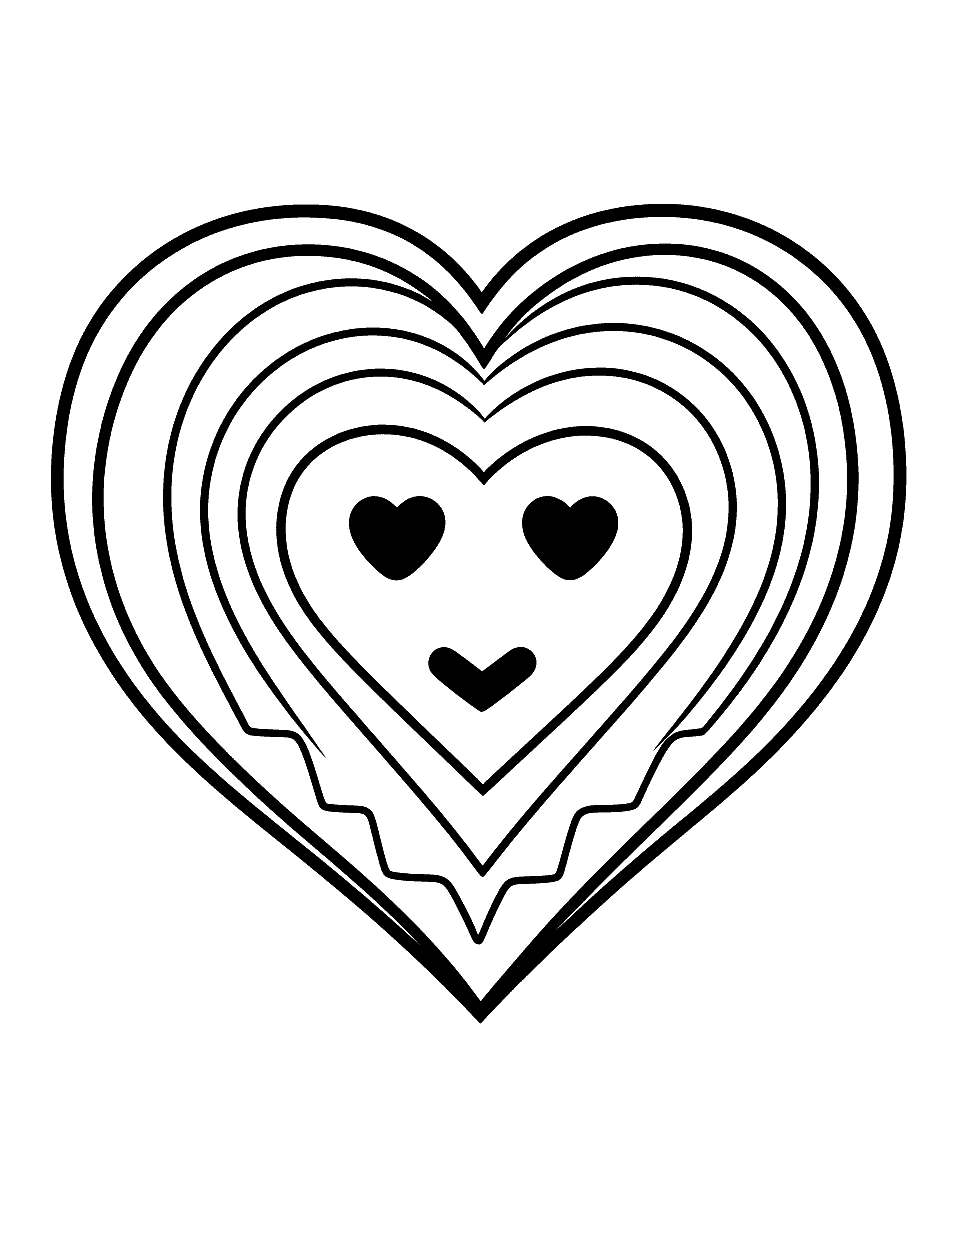 Cute Love Heart Coloring Page - A heart-shaped pillow with a cute smiley face and tiny arms for a huggable feel.